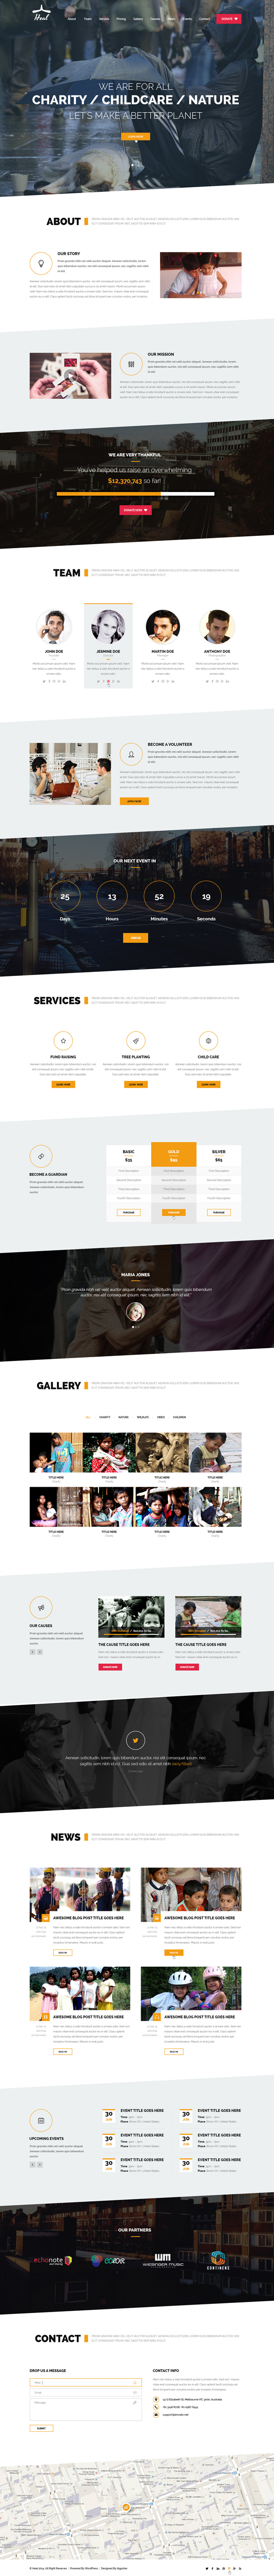 Heal - One Page Charity HTML Template